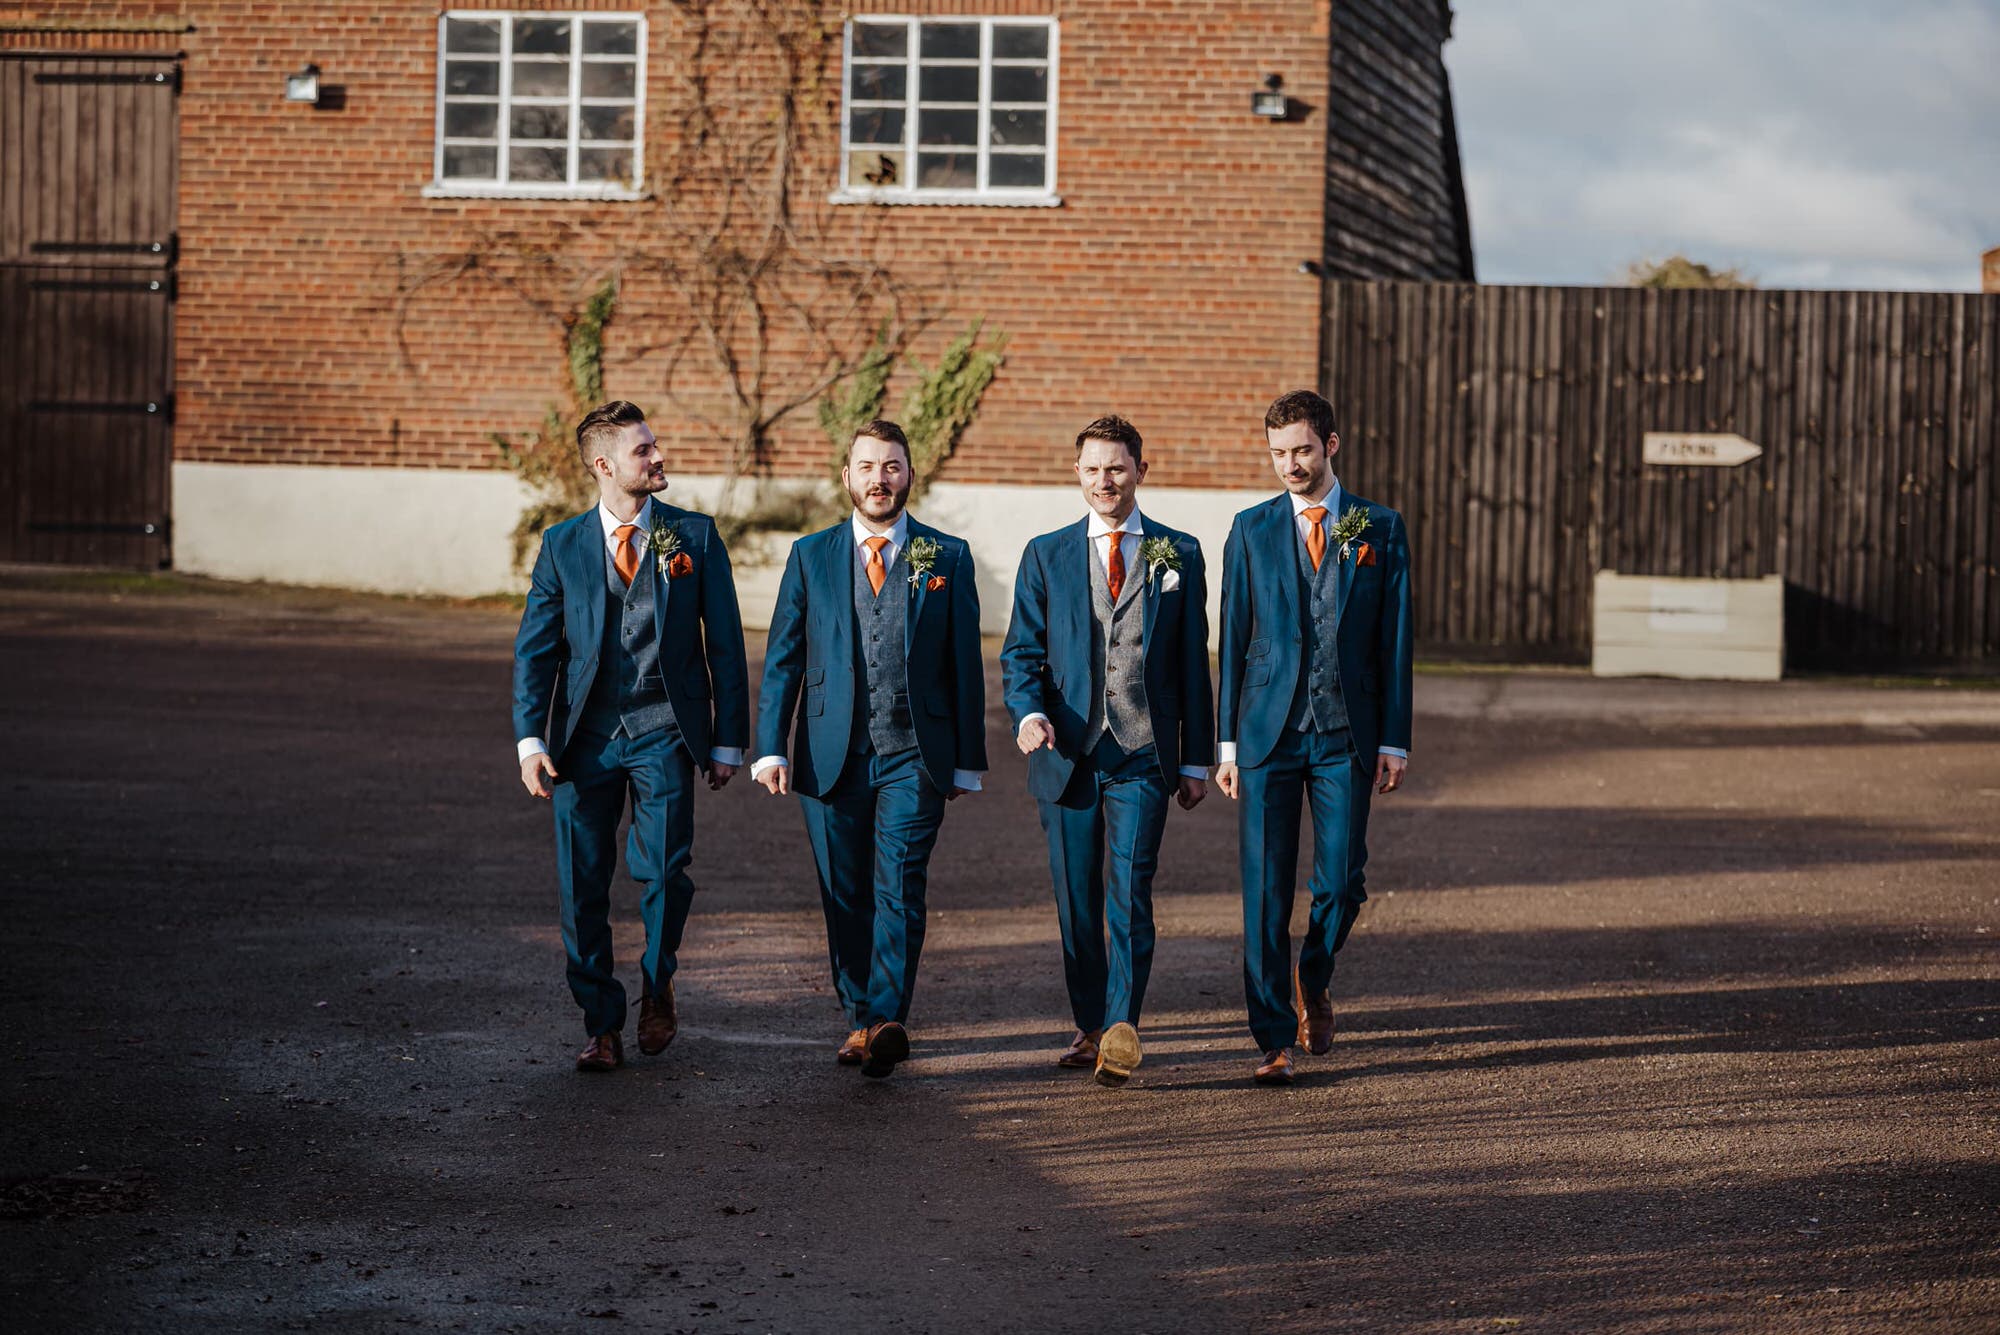 Groom and Groomsmen in blue suits outside the barn before the wedding Roshni photography The Milling Barn, Bluntswood Hall, Throcking wedding photographer